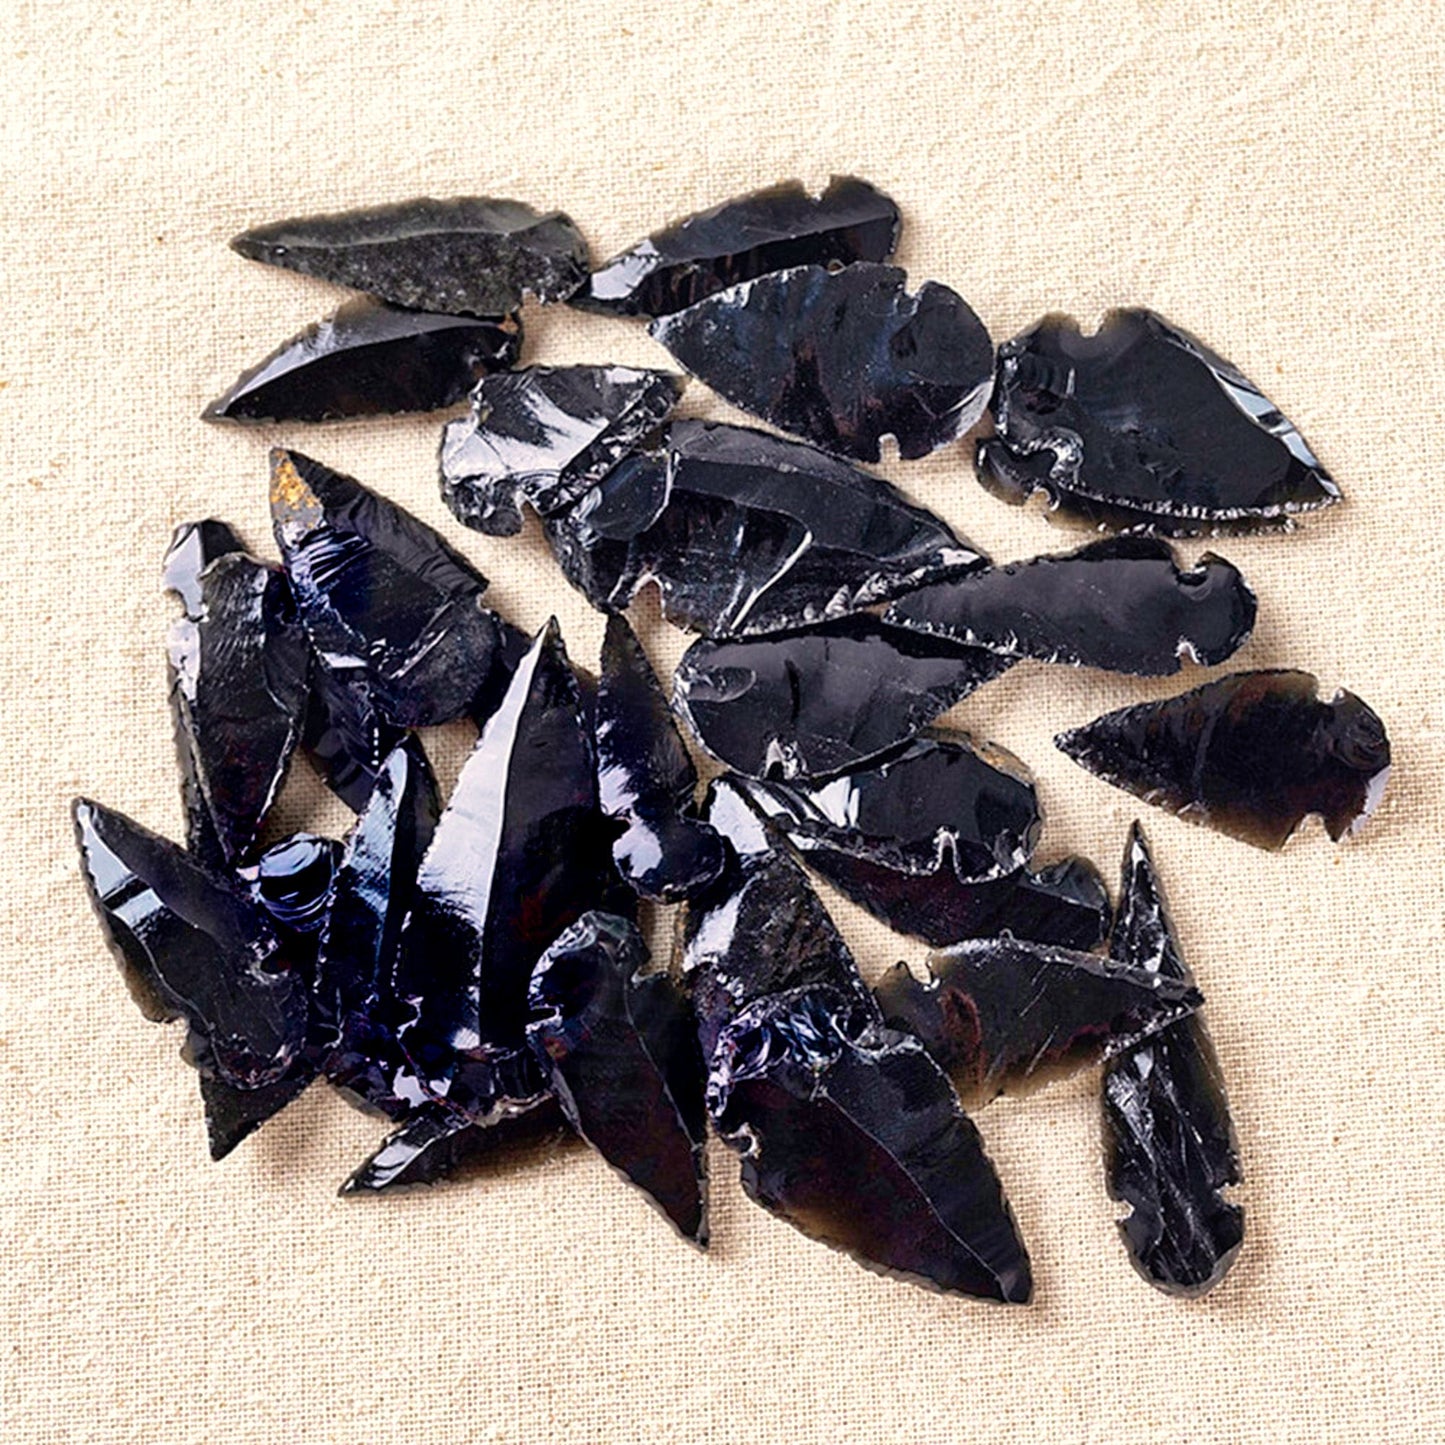 Natural Black Obsidian Carved Arrowheads Indian Style Replica Arrow Head Healing Crystals Specimen Collection DIY Jewelry Making